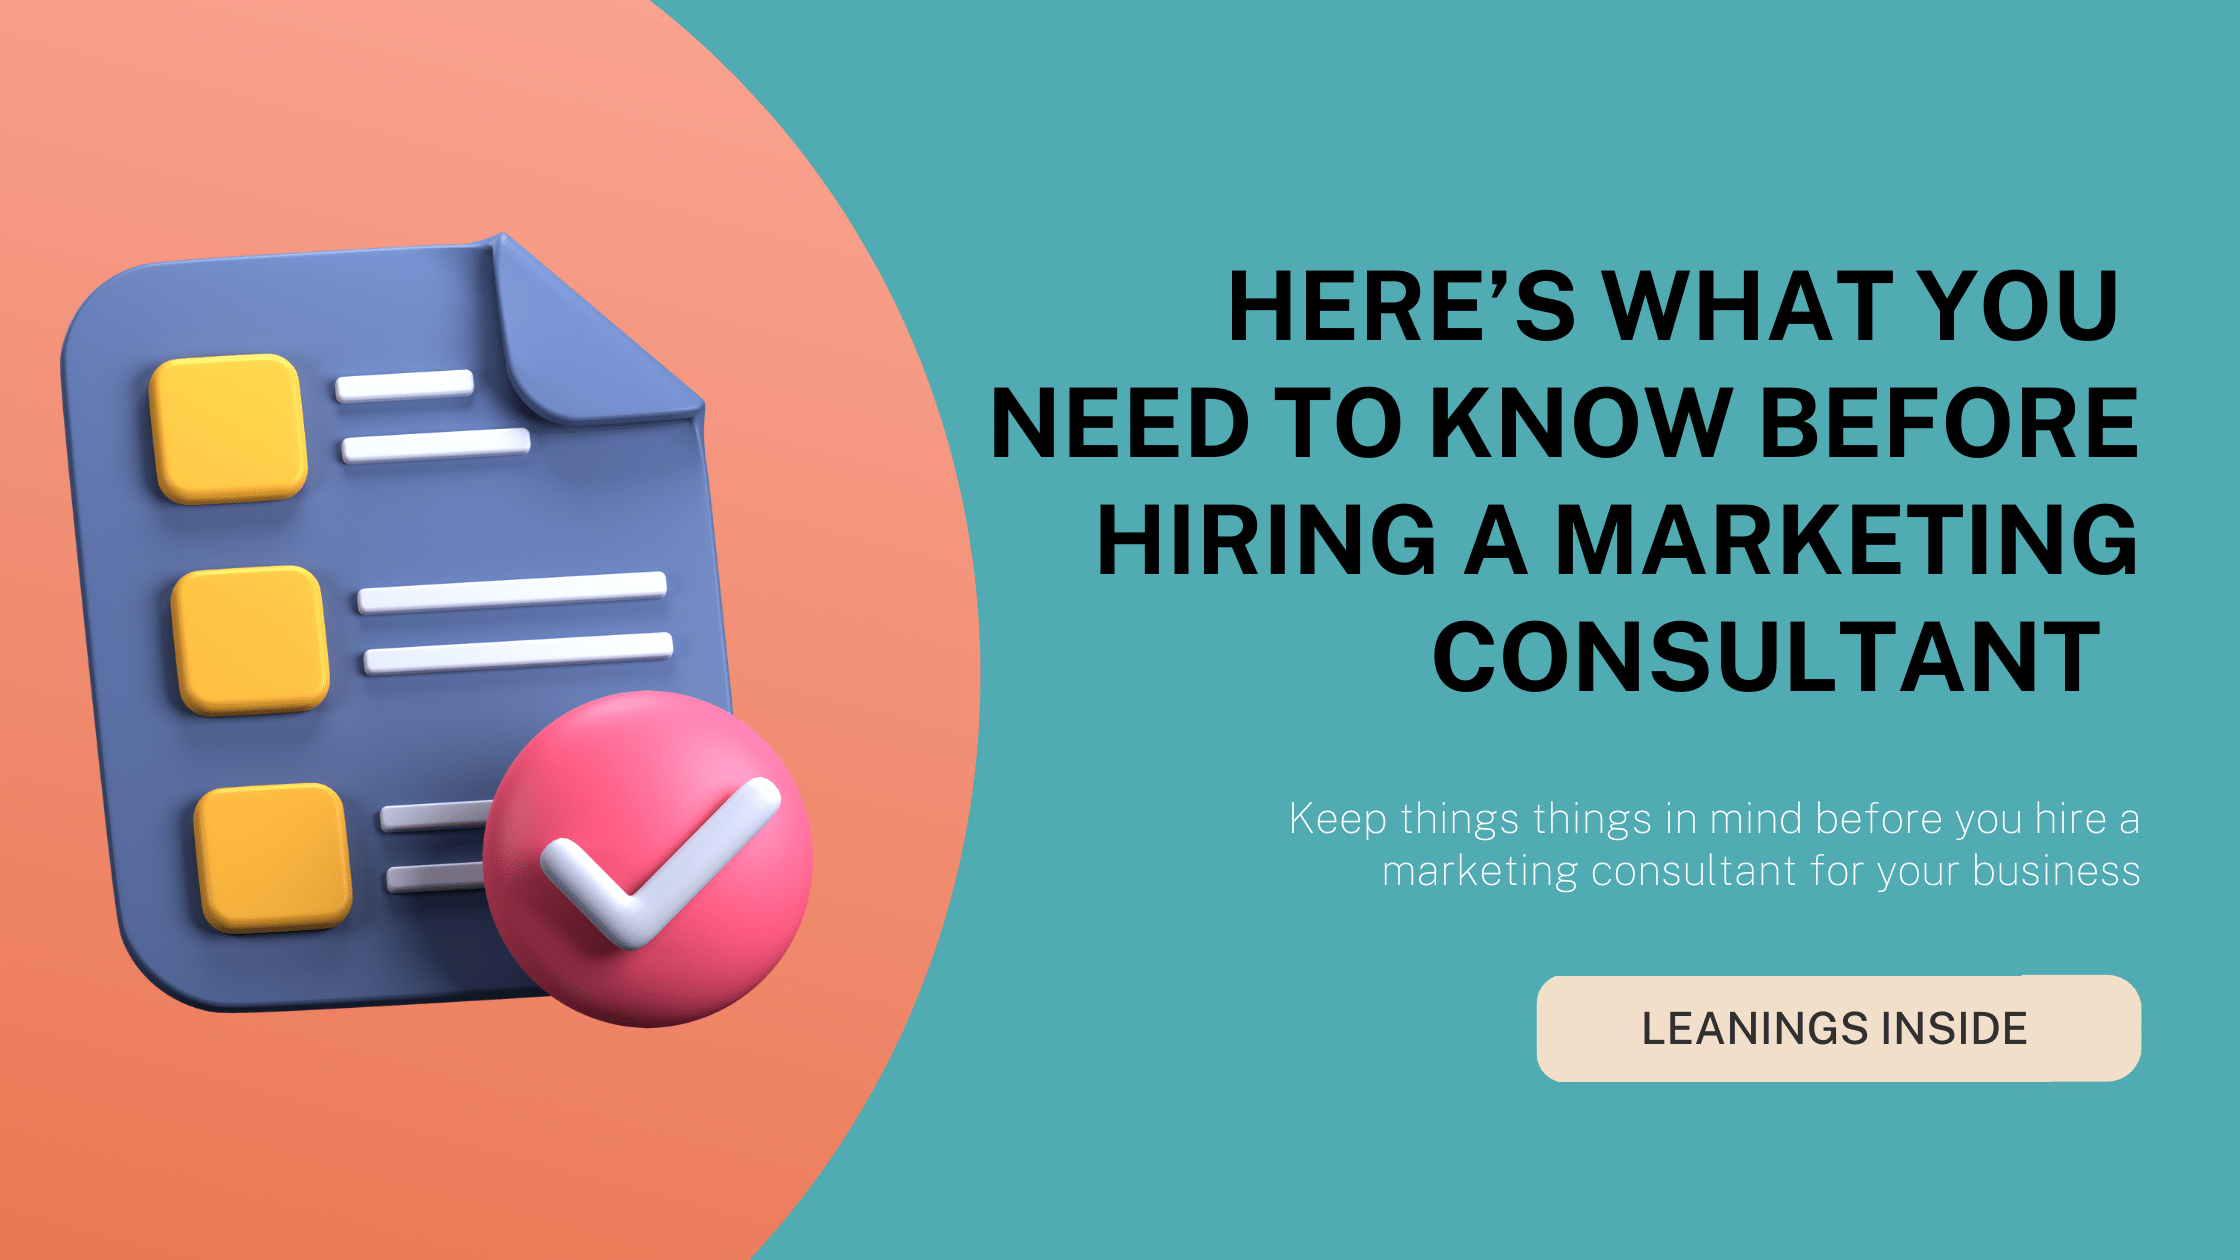 Here’s What You Need To Know Before Hiring A Marketing Consultant